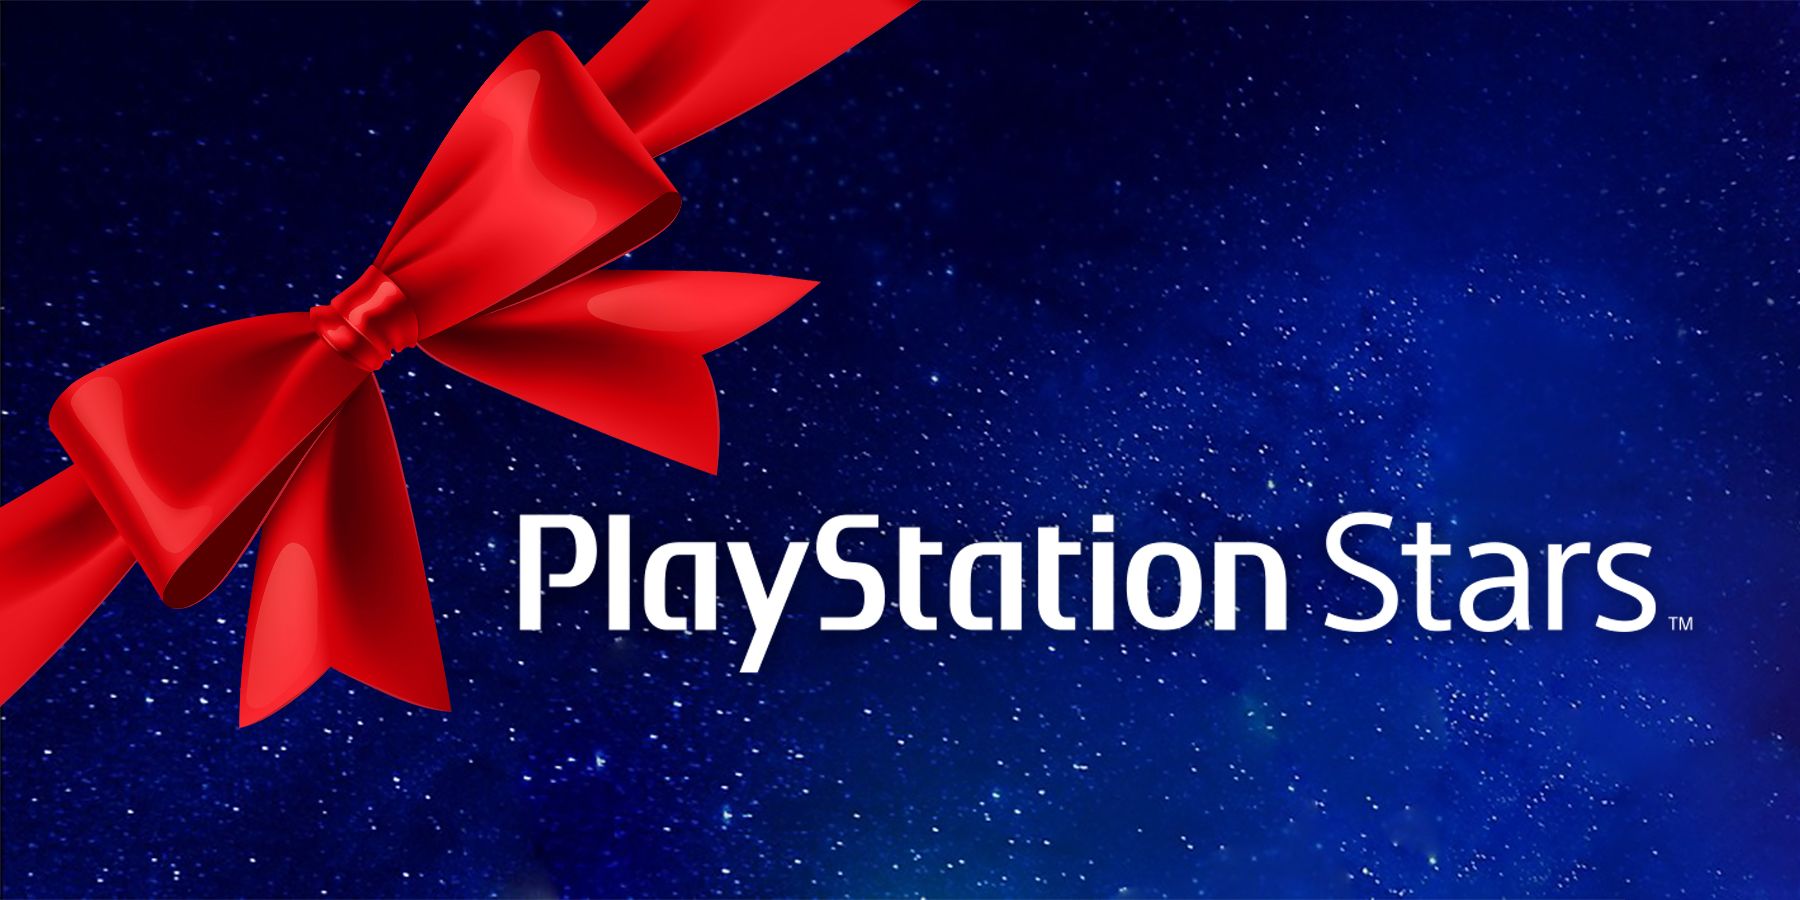 playstation stars on starry background with christmas bow